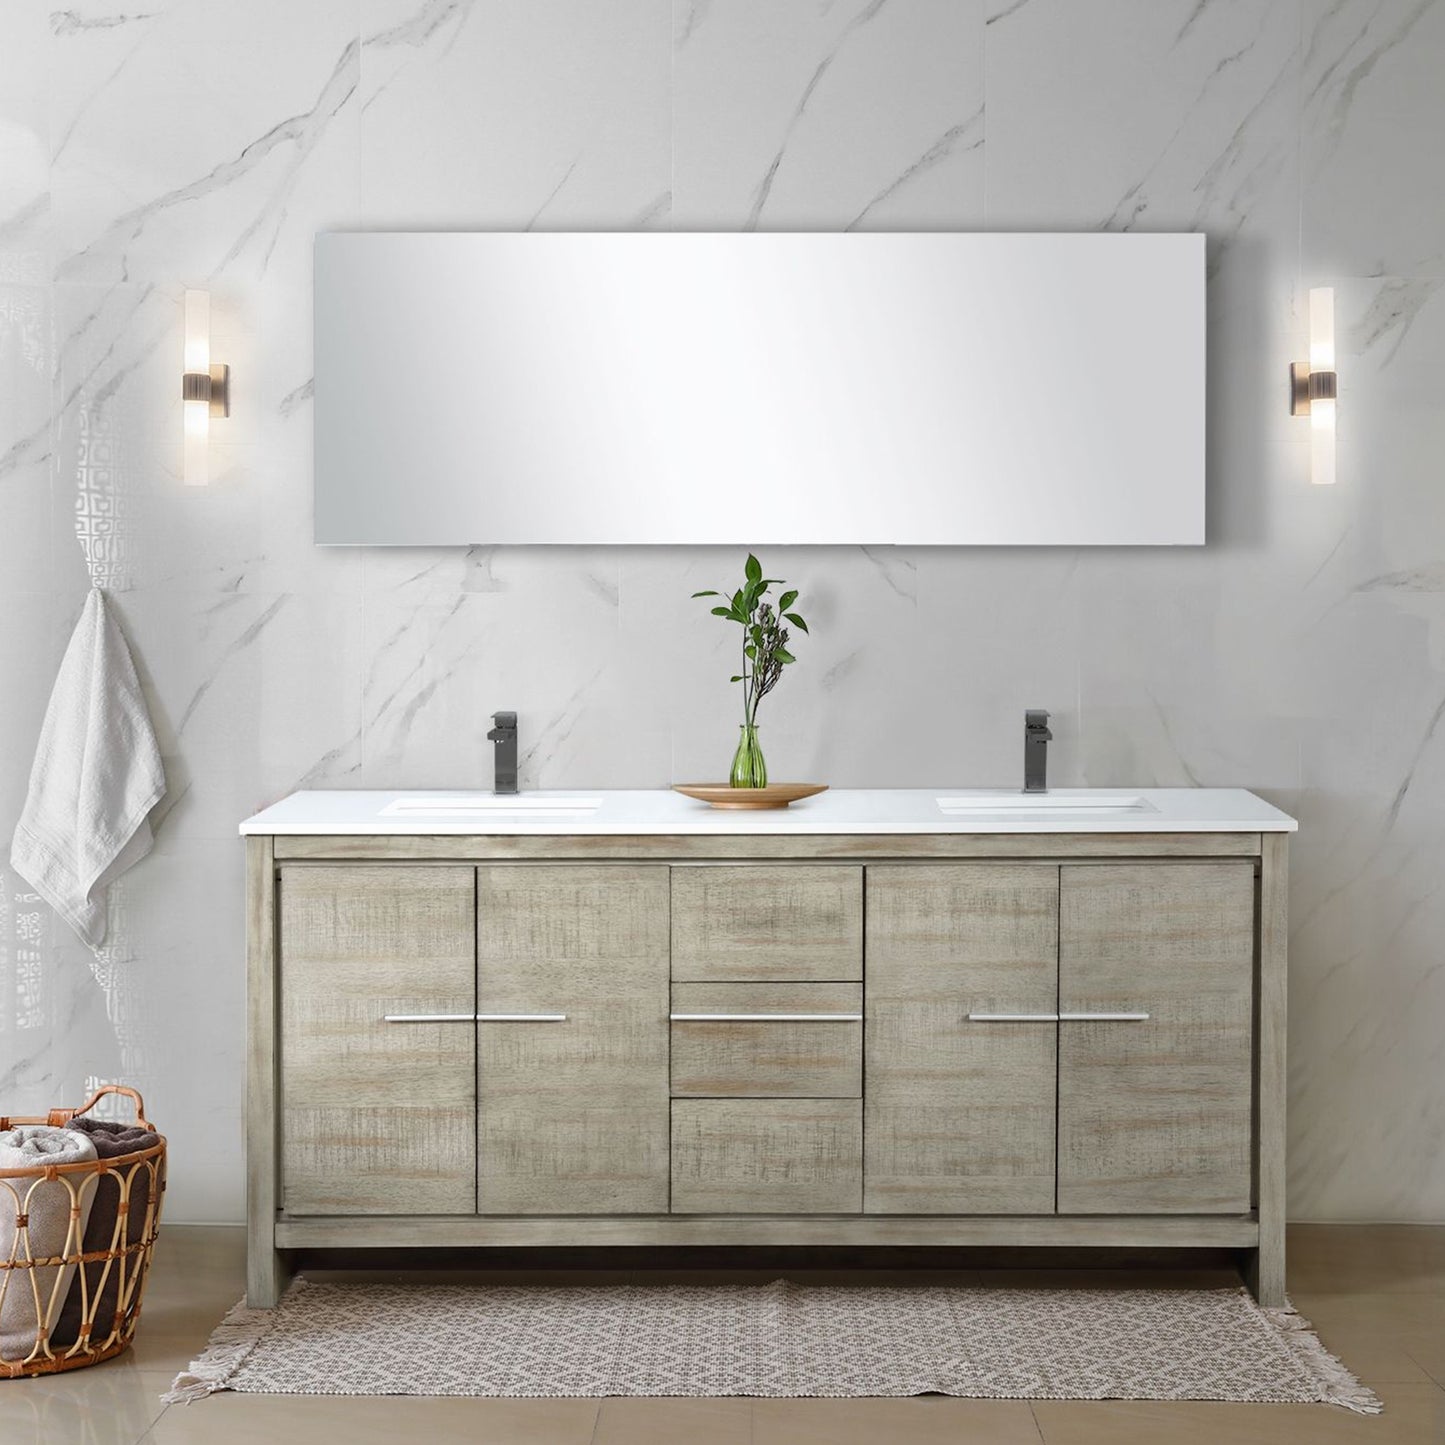 Lexora Collection Lafarre 72 inch Rustic Acacia Double Bath Vanity, Cultured Marble Top, Faucet Set and 70 inch Mirror - Luxe Bathroom Vanities